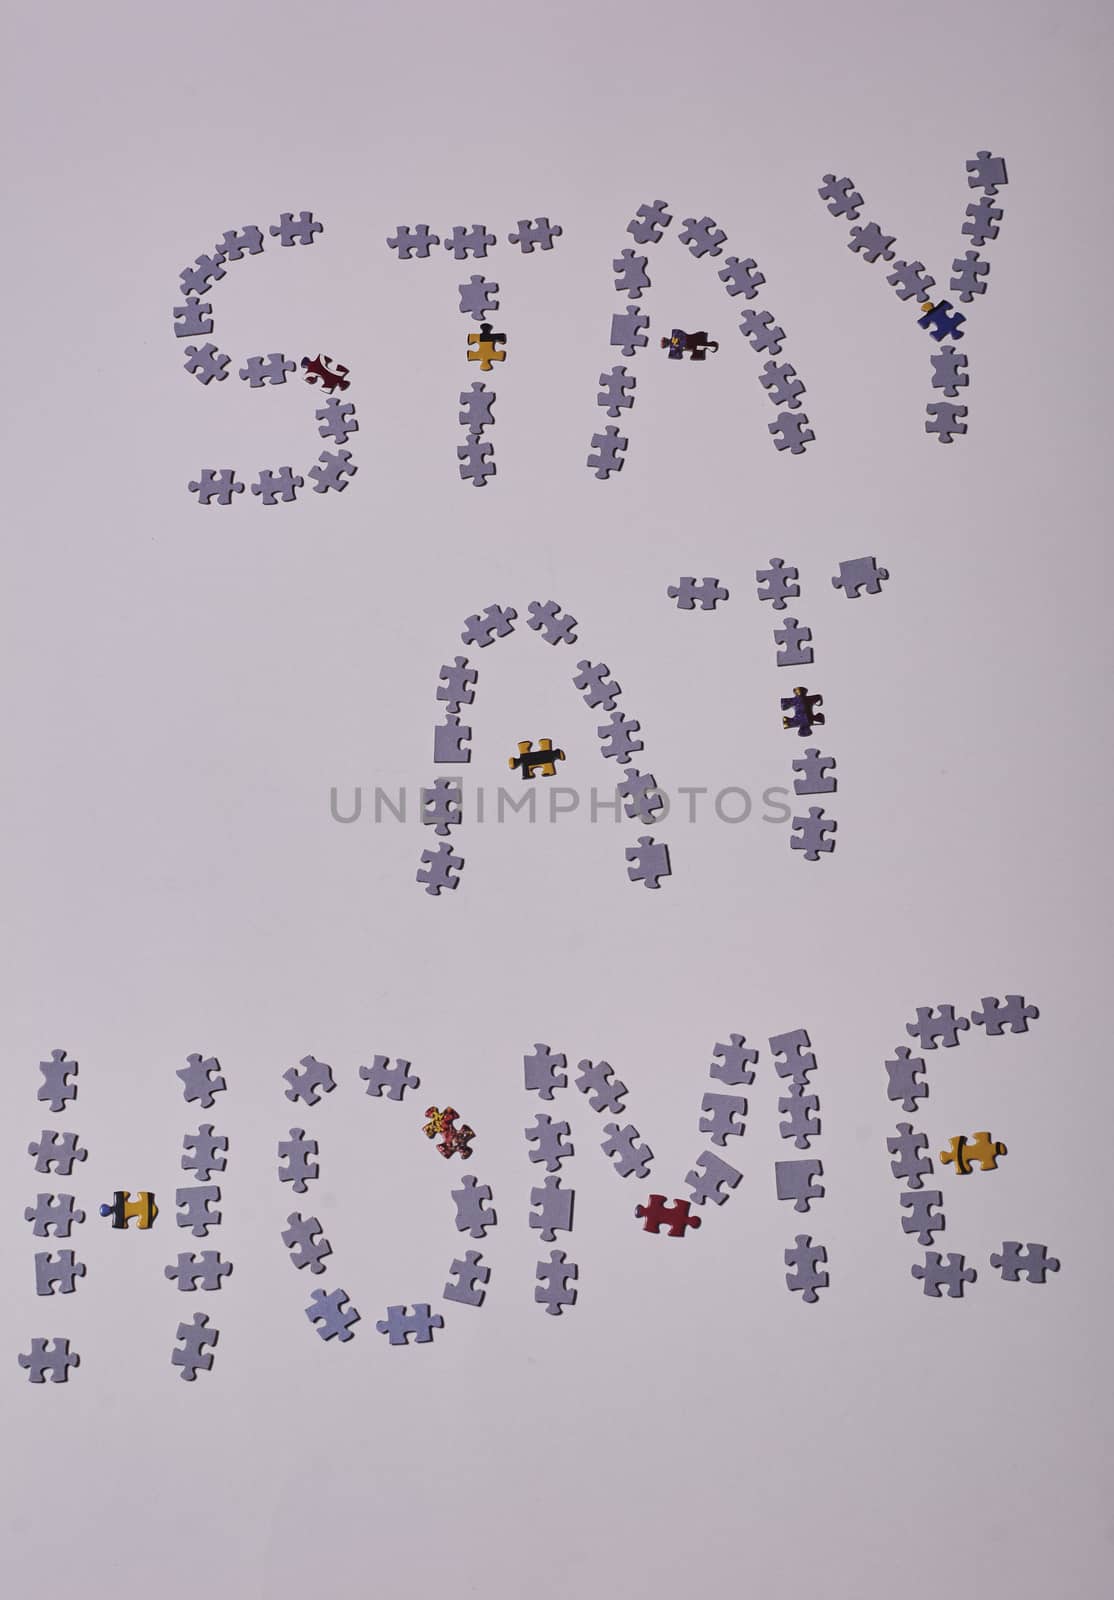 Puzzle pieces on white background, Covid-19, Stay at home